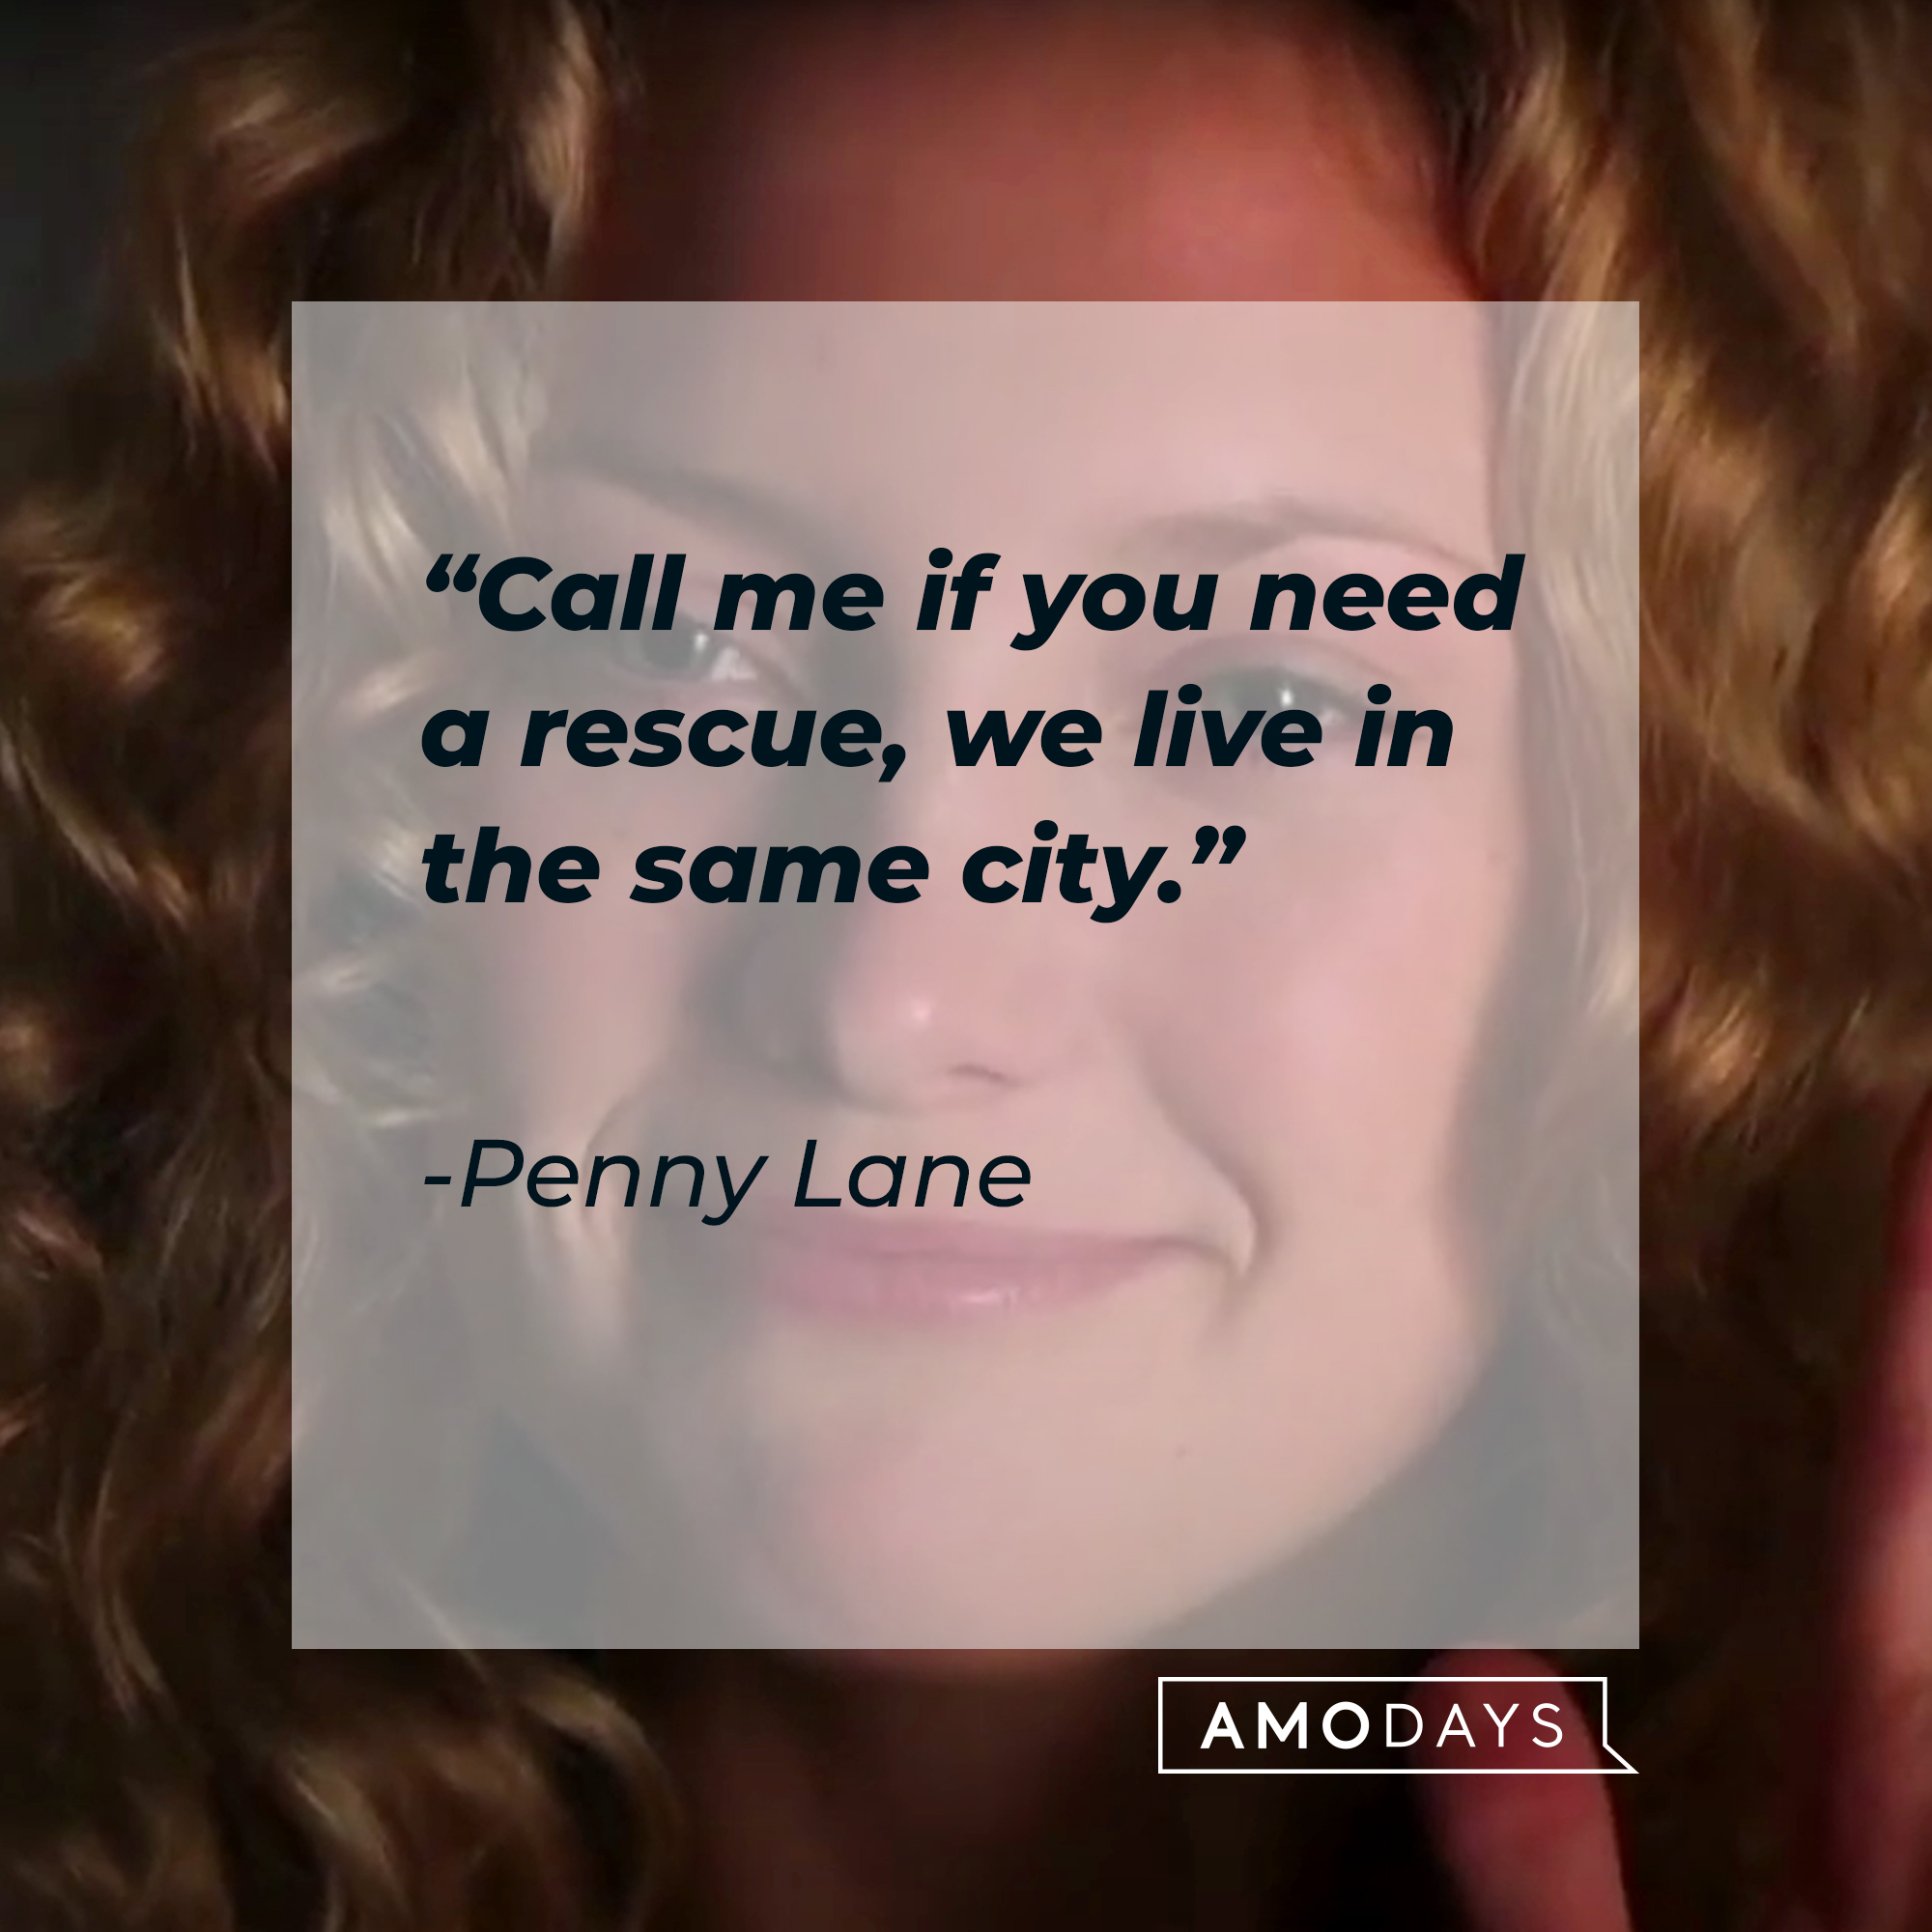 Penny Lane's quote: “Call me if you need a rescue, we live in the same city.” | Source: facebook.com/AlmostFamousTheMovie